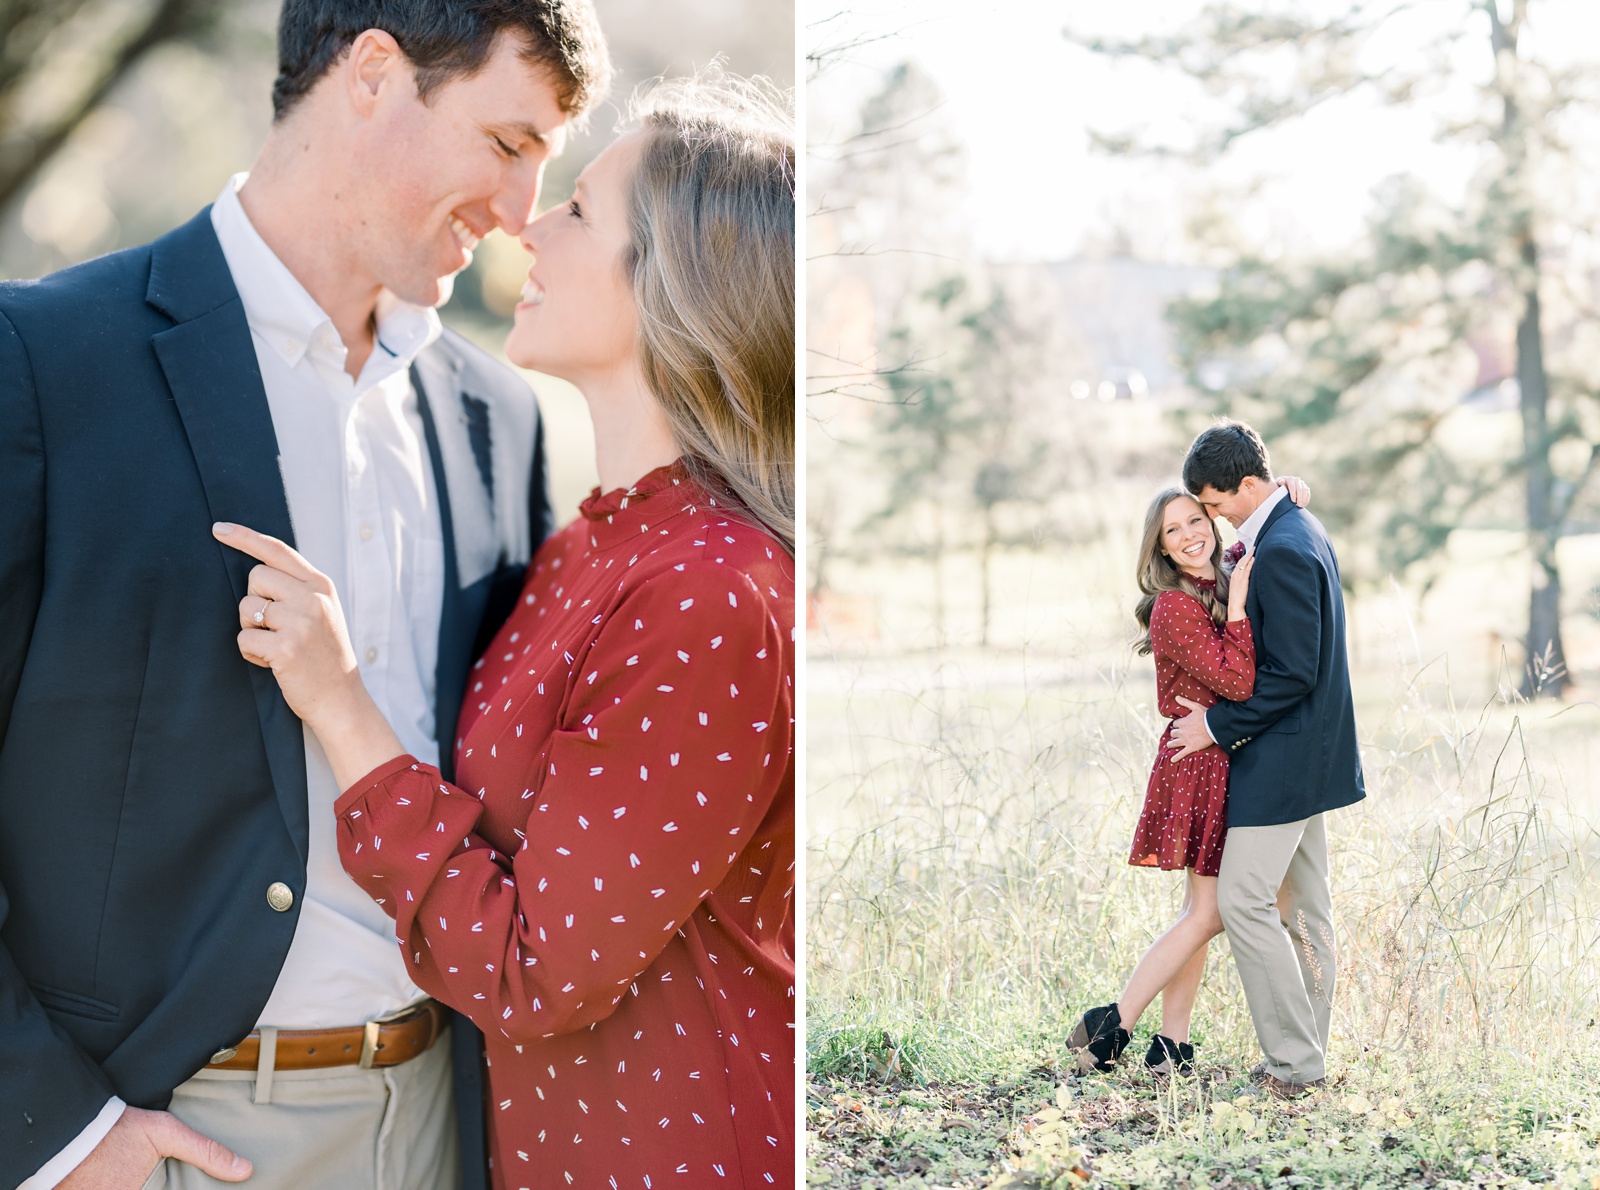 Virginia small hometown engagement session at historic home and family farm